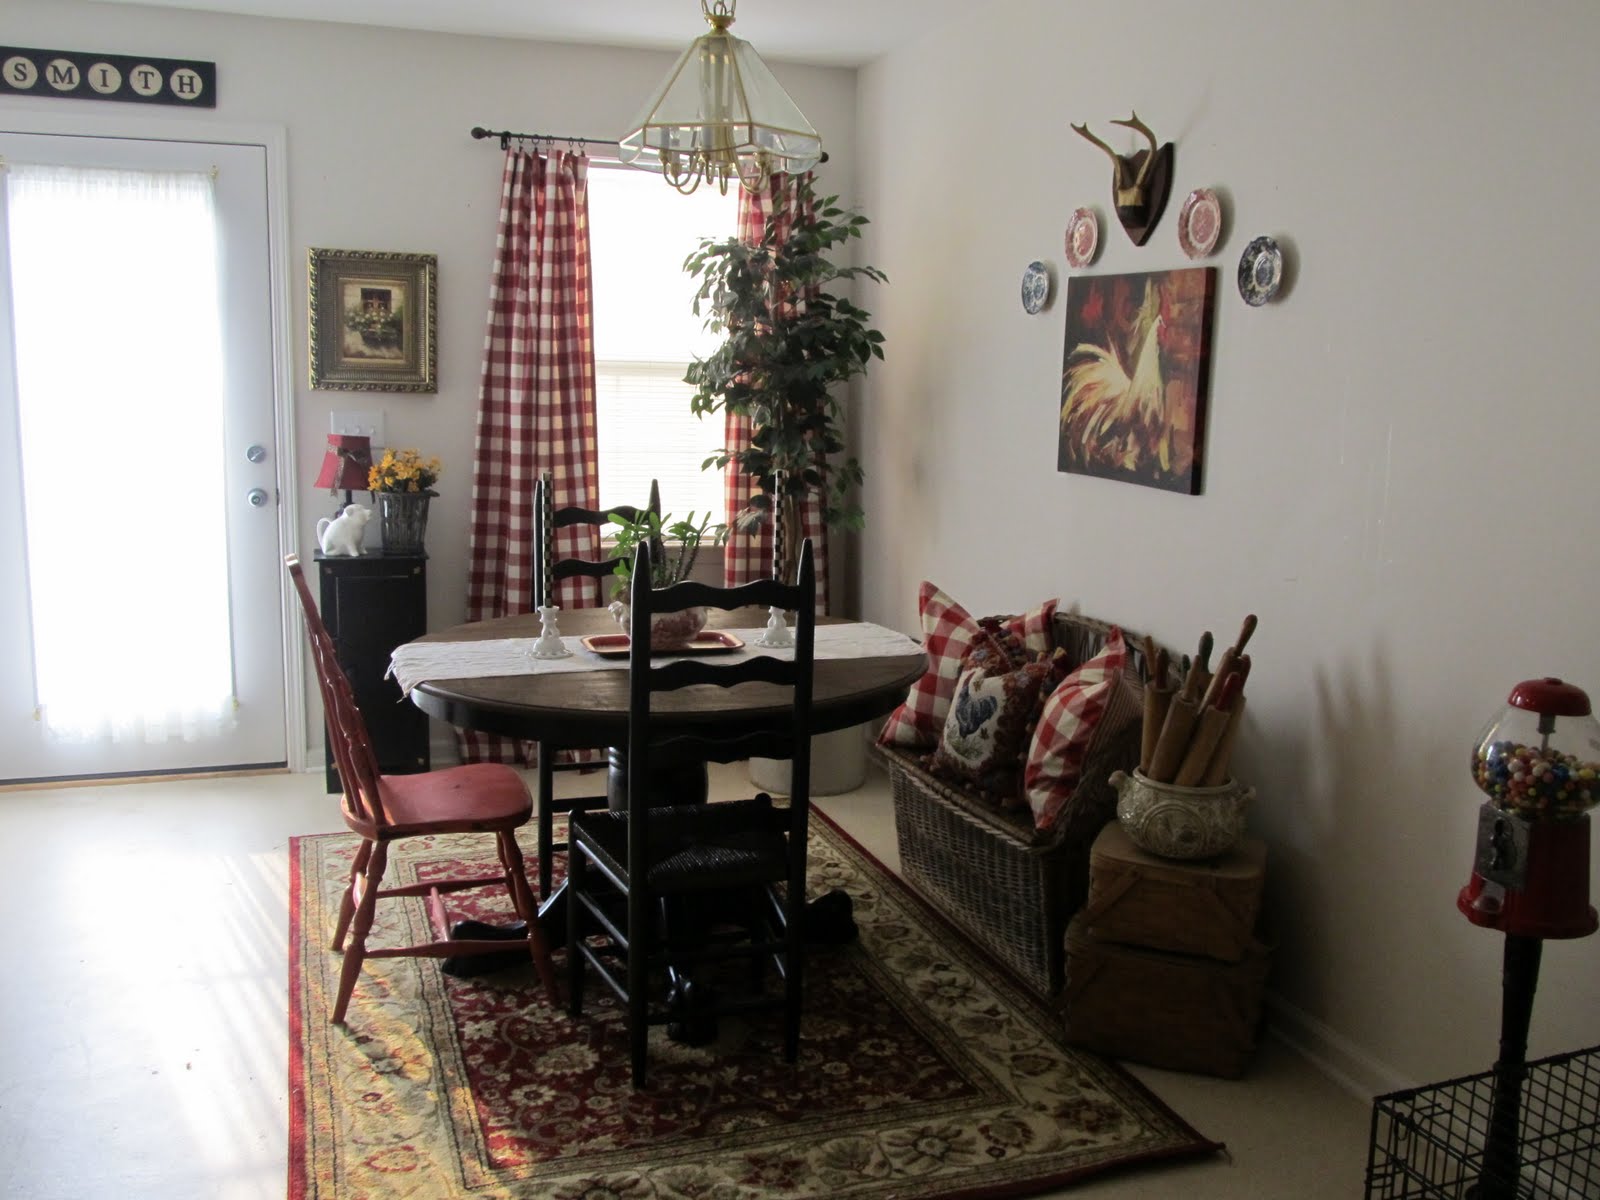 Dreaming of a Farmhouse: Small updates in the dining room